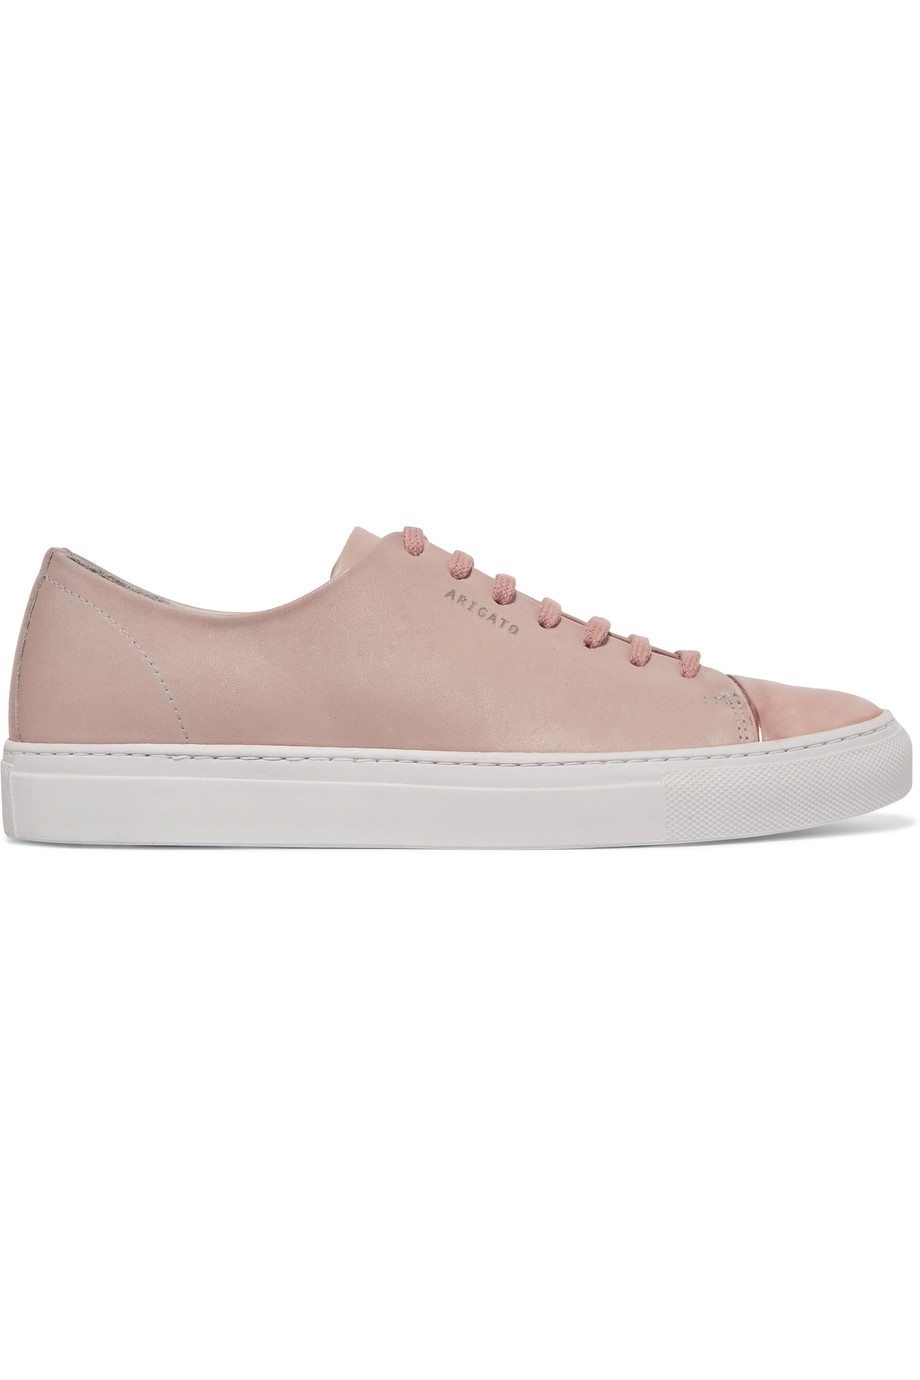 Ditch Your Black Sneakers for These Pastel Pink Ones Instead - FASHION ...